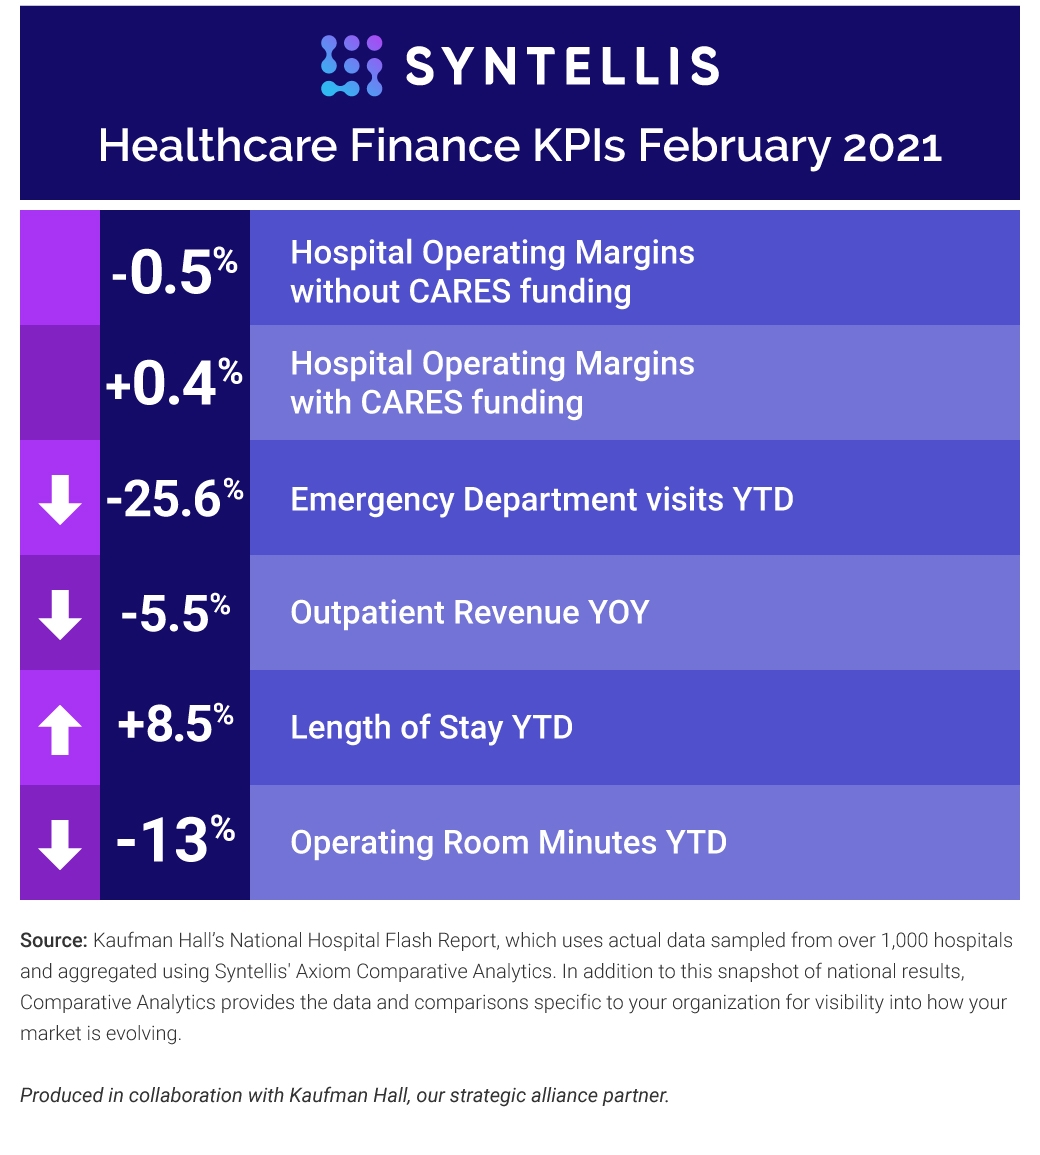 Top 5 Healthcare Finance KPIs for February 2021